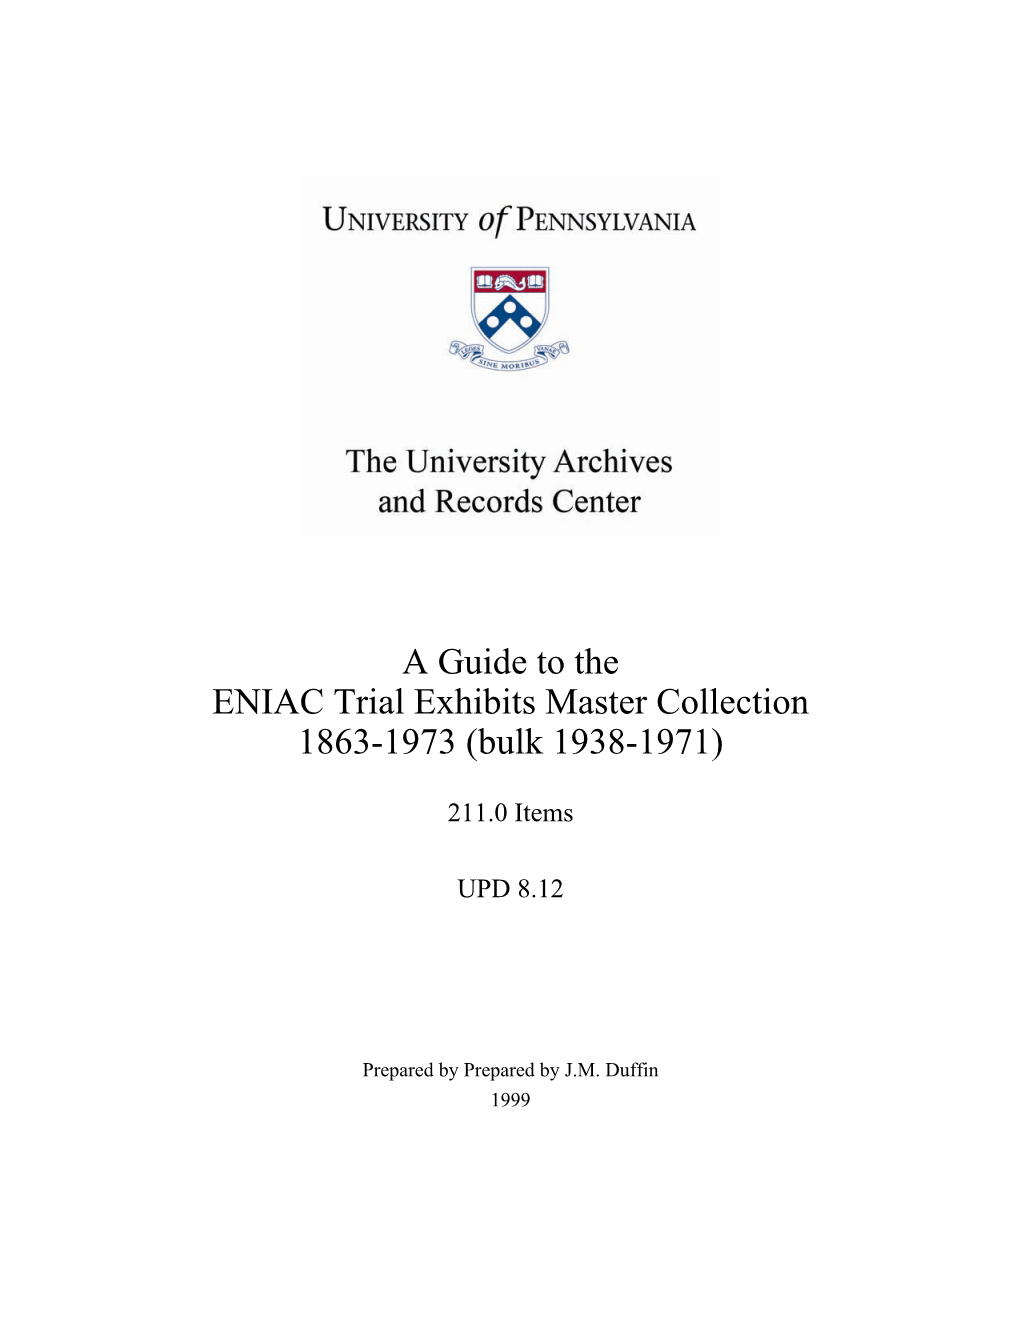 Guide, ENIAC Trial Exhibits Master Collection (UPD 8.12)